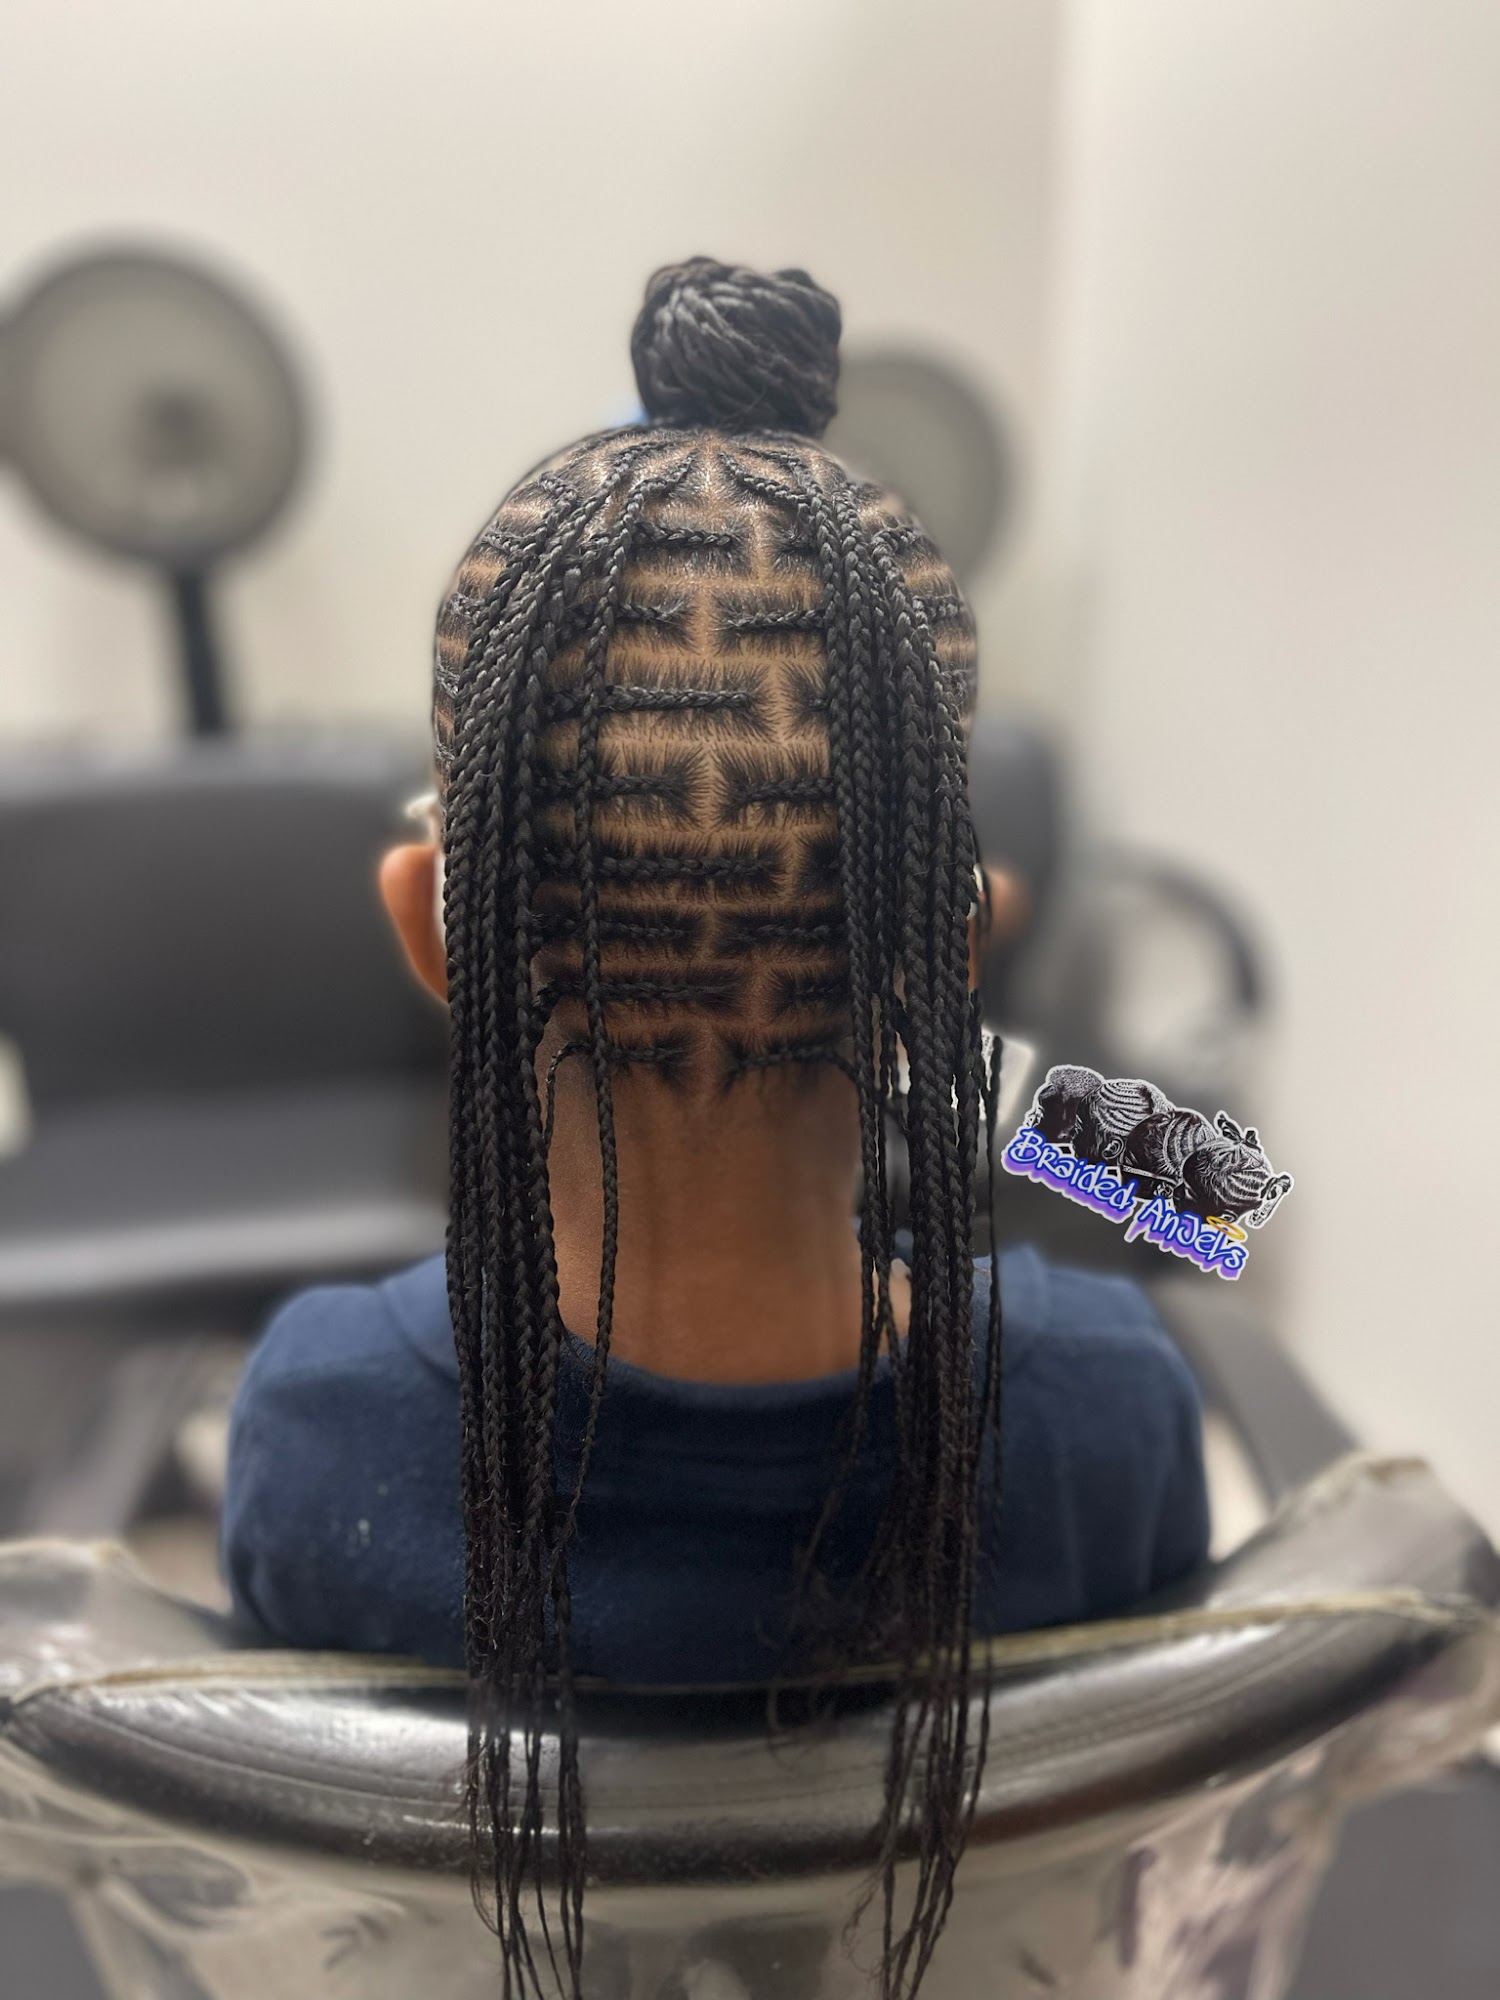 Braided AnJeLs 5614 Silver Hill Rd Suite 126, District Heights Maryland 20747